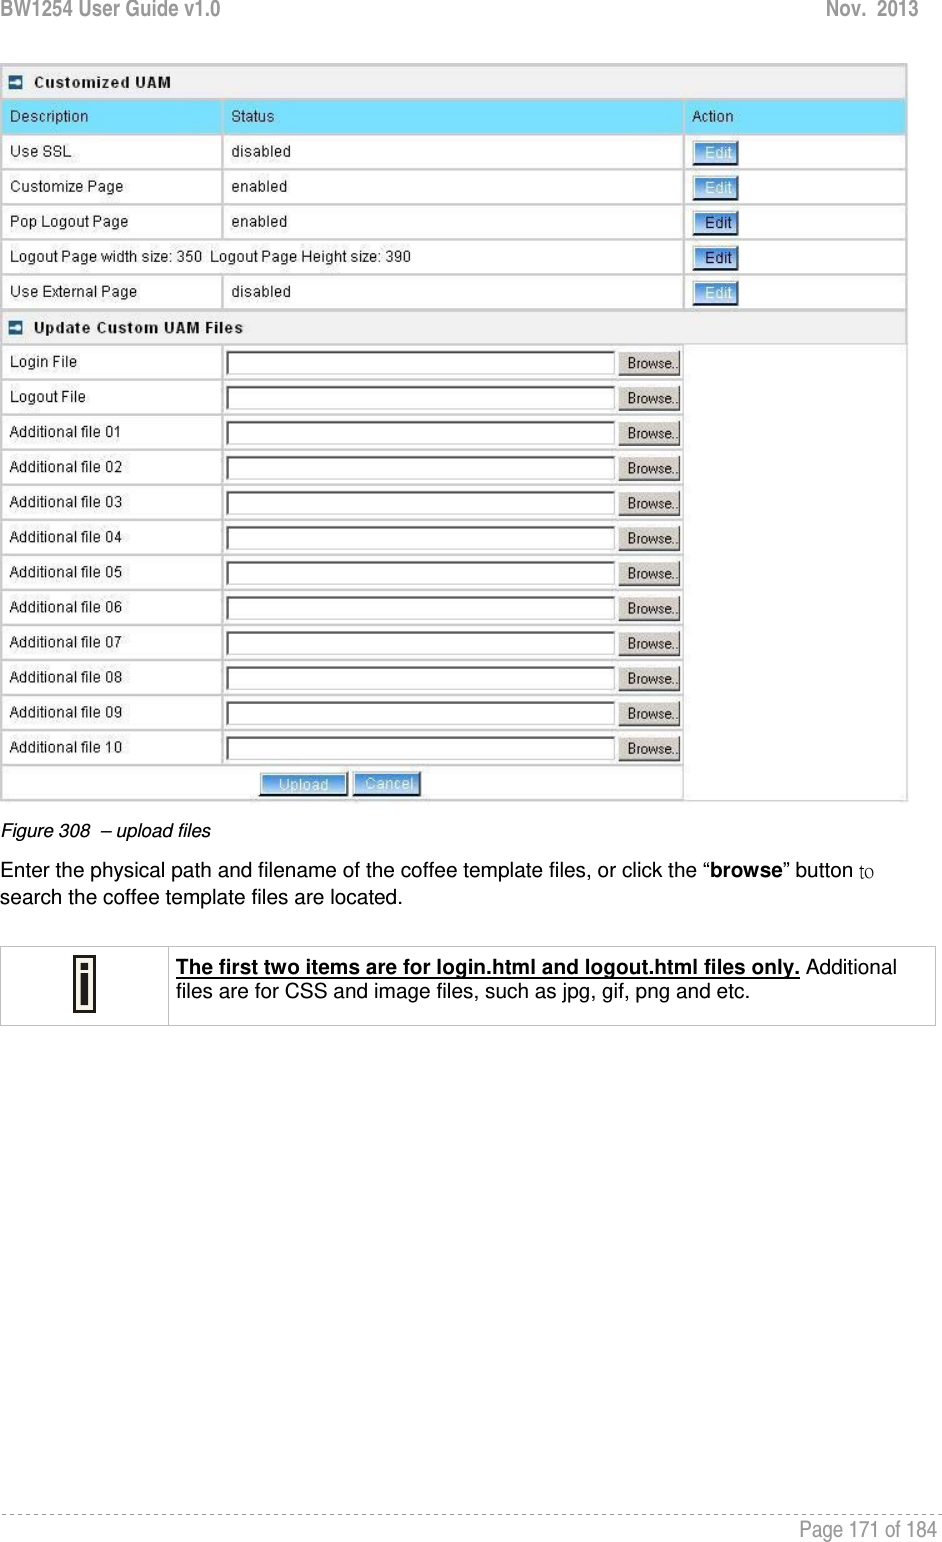 BW1254 User Guide v1.0  Nov.  2013     Page 171 of 184    Figure 308  – upload files Enter the physical path and filename of the coffee template files, or click the “browse” button to search the coffee template files are located.    The first two items are for login.html and logout.html files only. Additional files are for CSS and image files, such as jpg, gif, png and etc.   